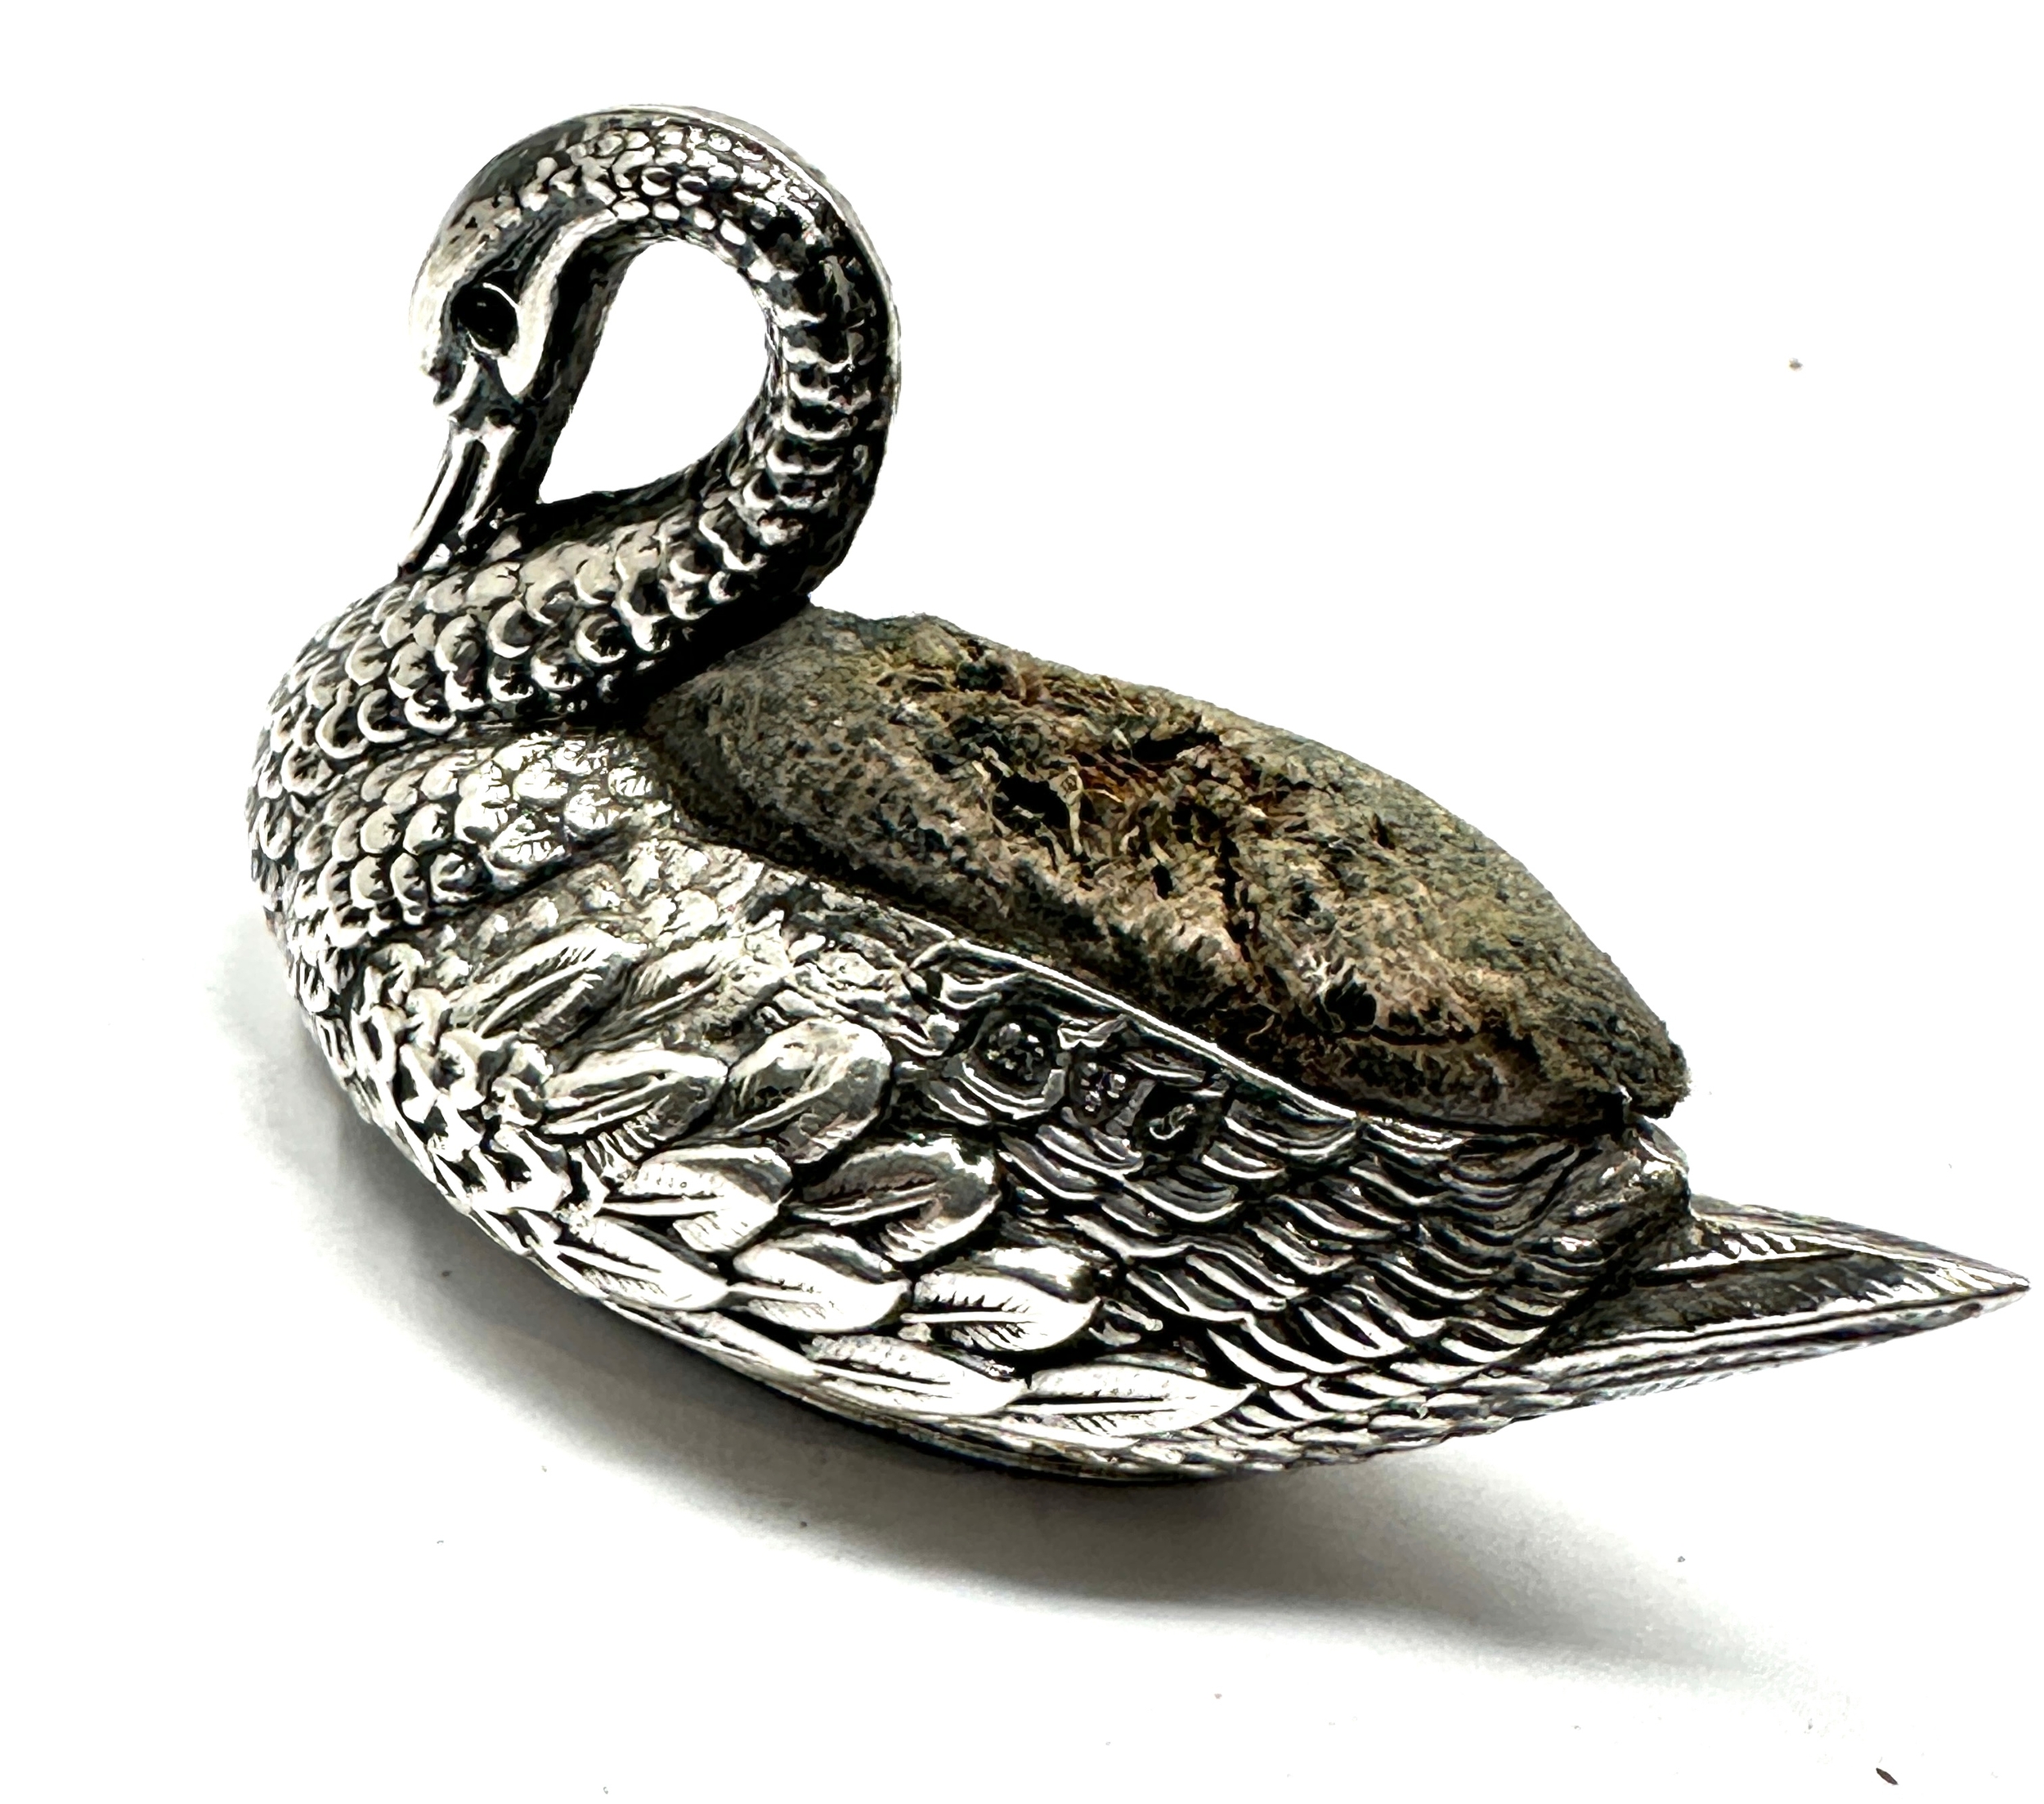 Antique swan pin cushion chester silver hallmarks - Image 2 of 4